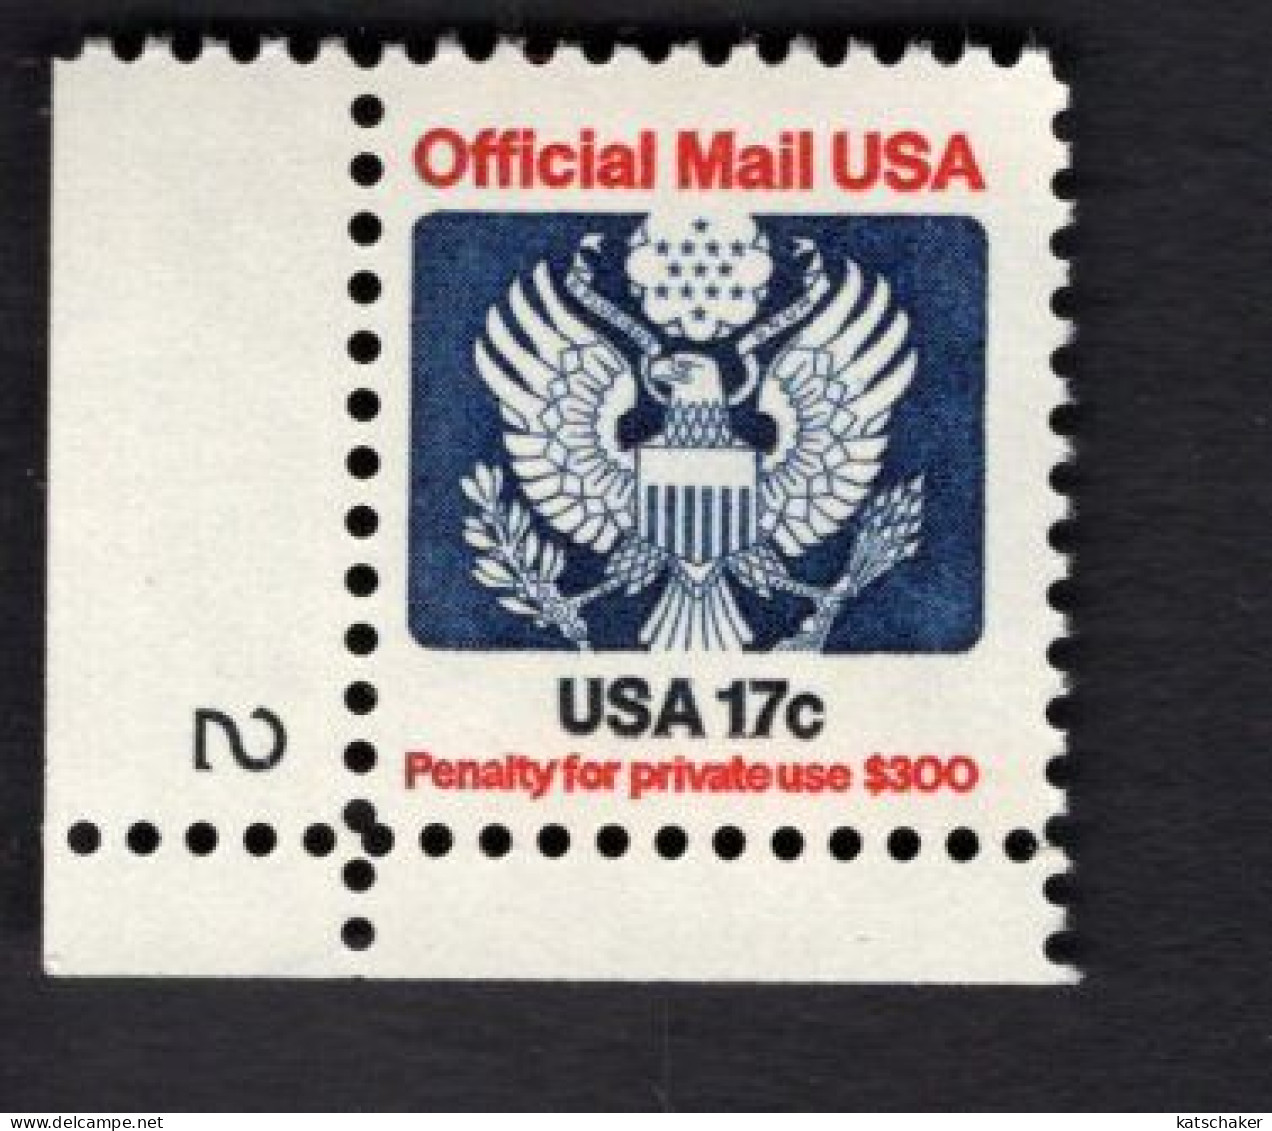 2008954892 1983 SCOTT O130 (XX)  POSTFRIS MINT NEVER HINGED - EAGLE AND SHIELD OFFICIAL MAIL - PLATE NUMBER 2 - Servizio